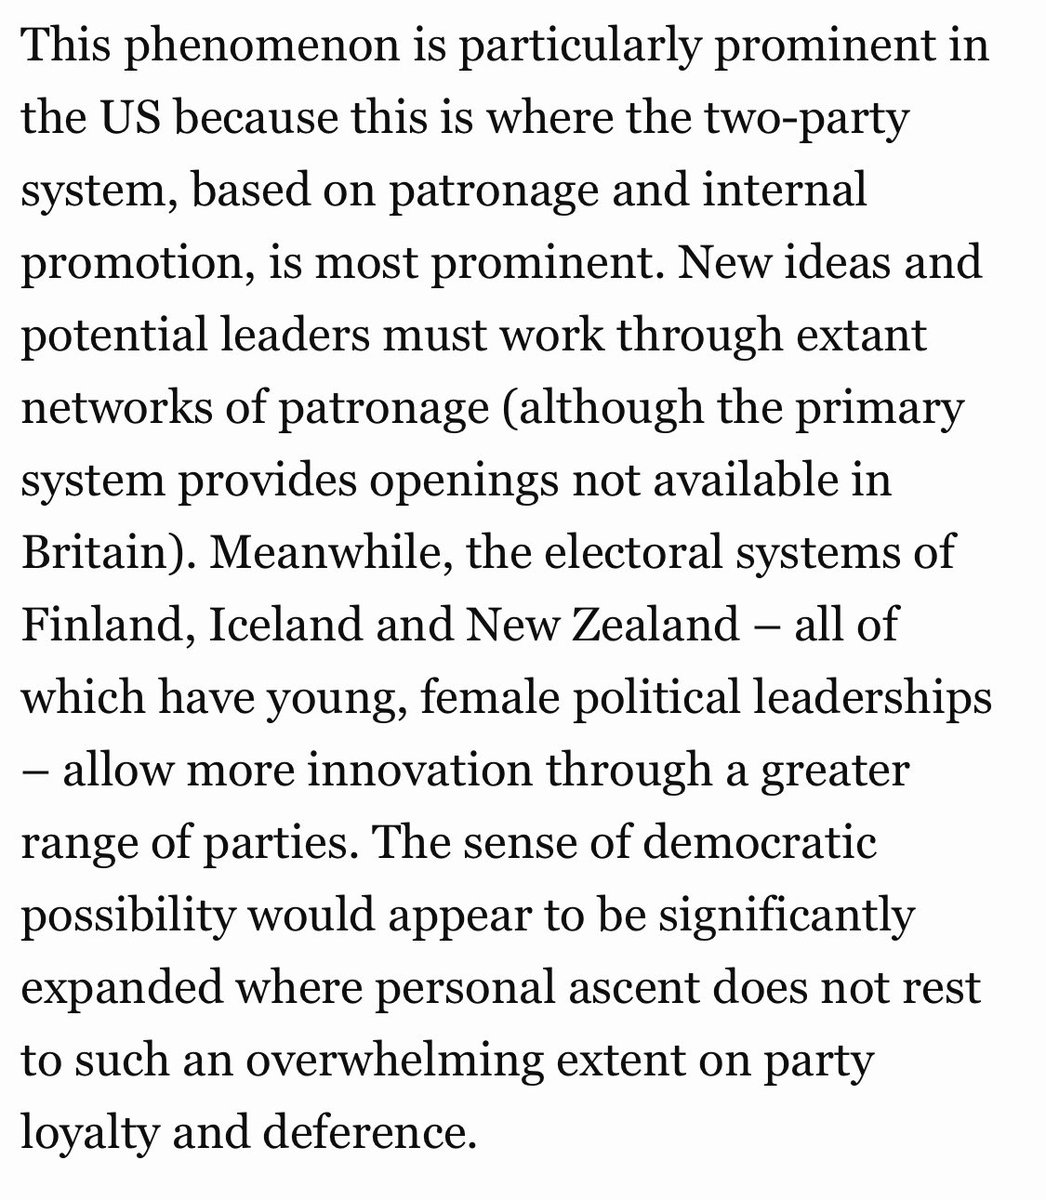 First past the post systems amplify all of these deeply corrosive trends. It is very possible that gerontocracy and plutocracy become most unassailable in these systems. This from the article 